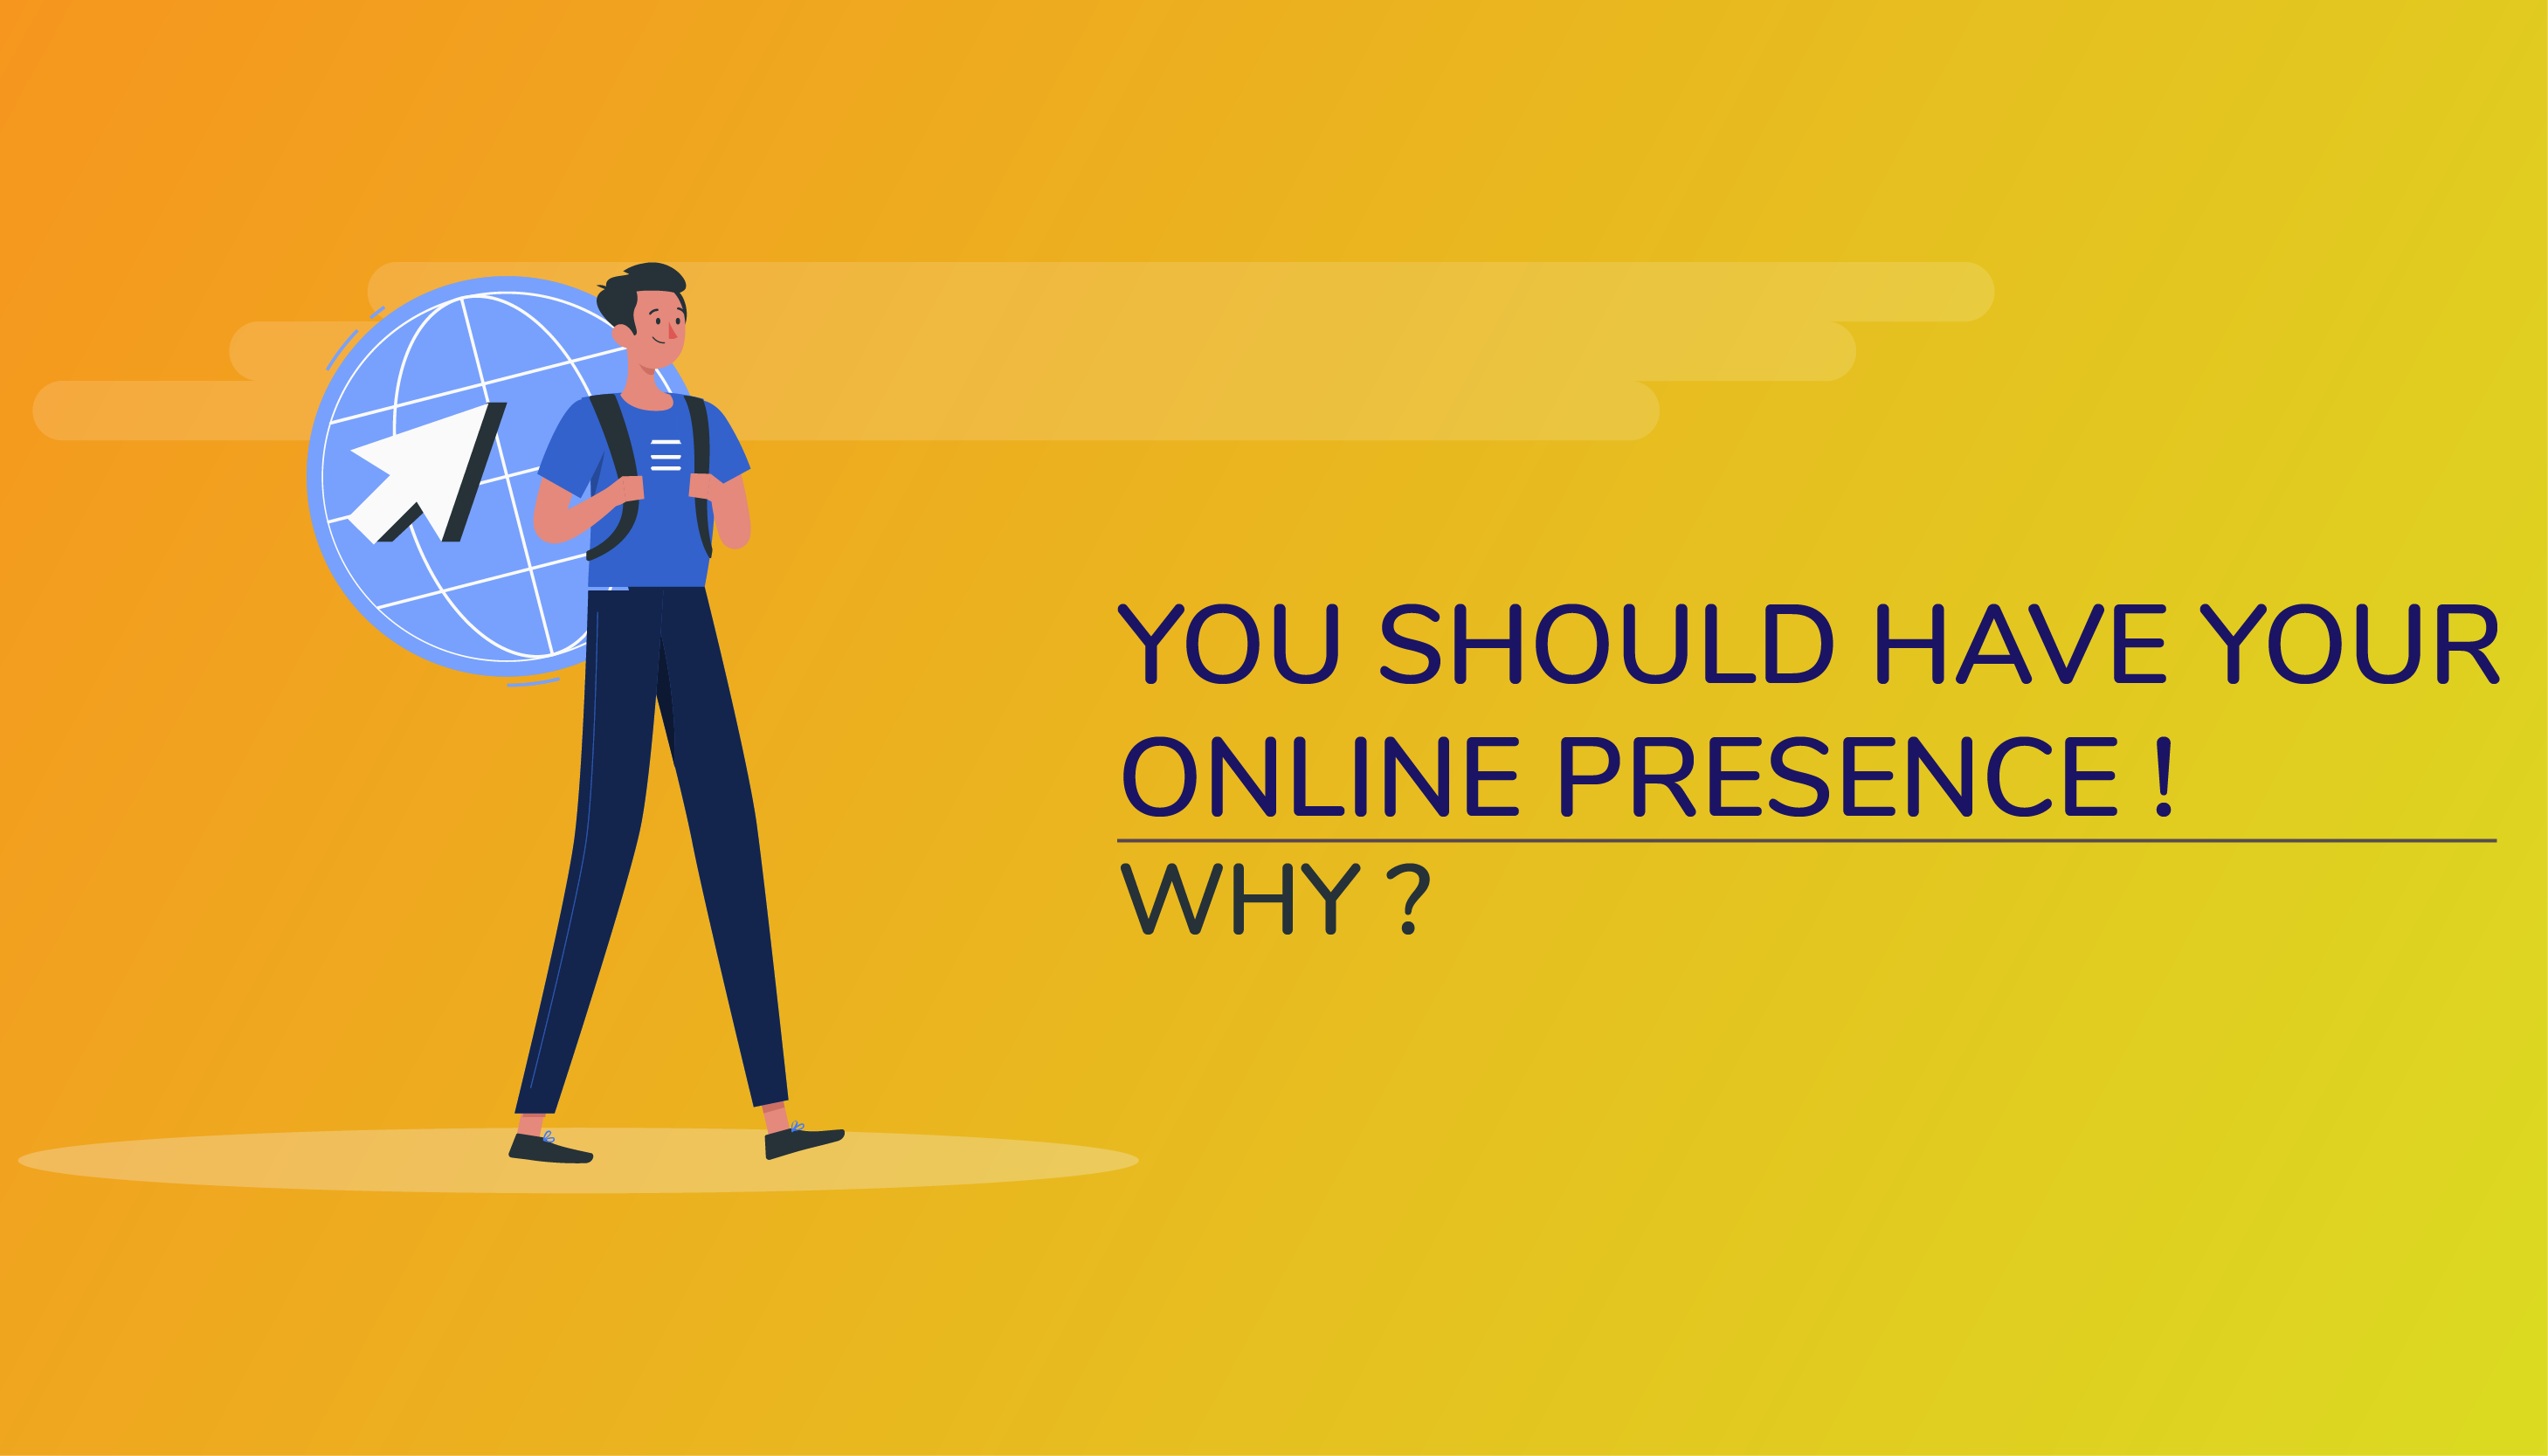 You should have your online presence! Why? - Edukit